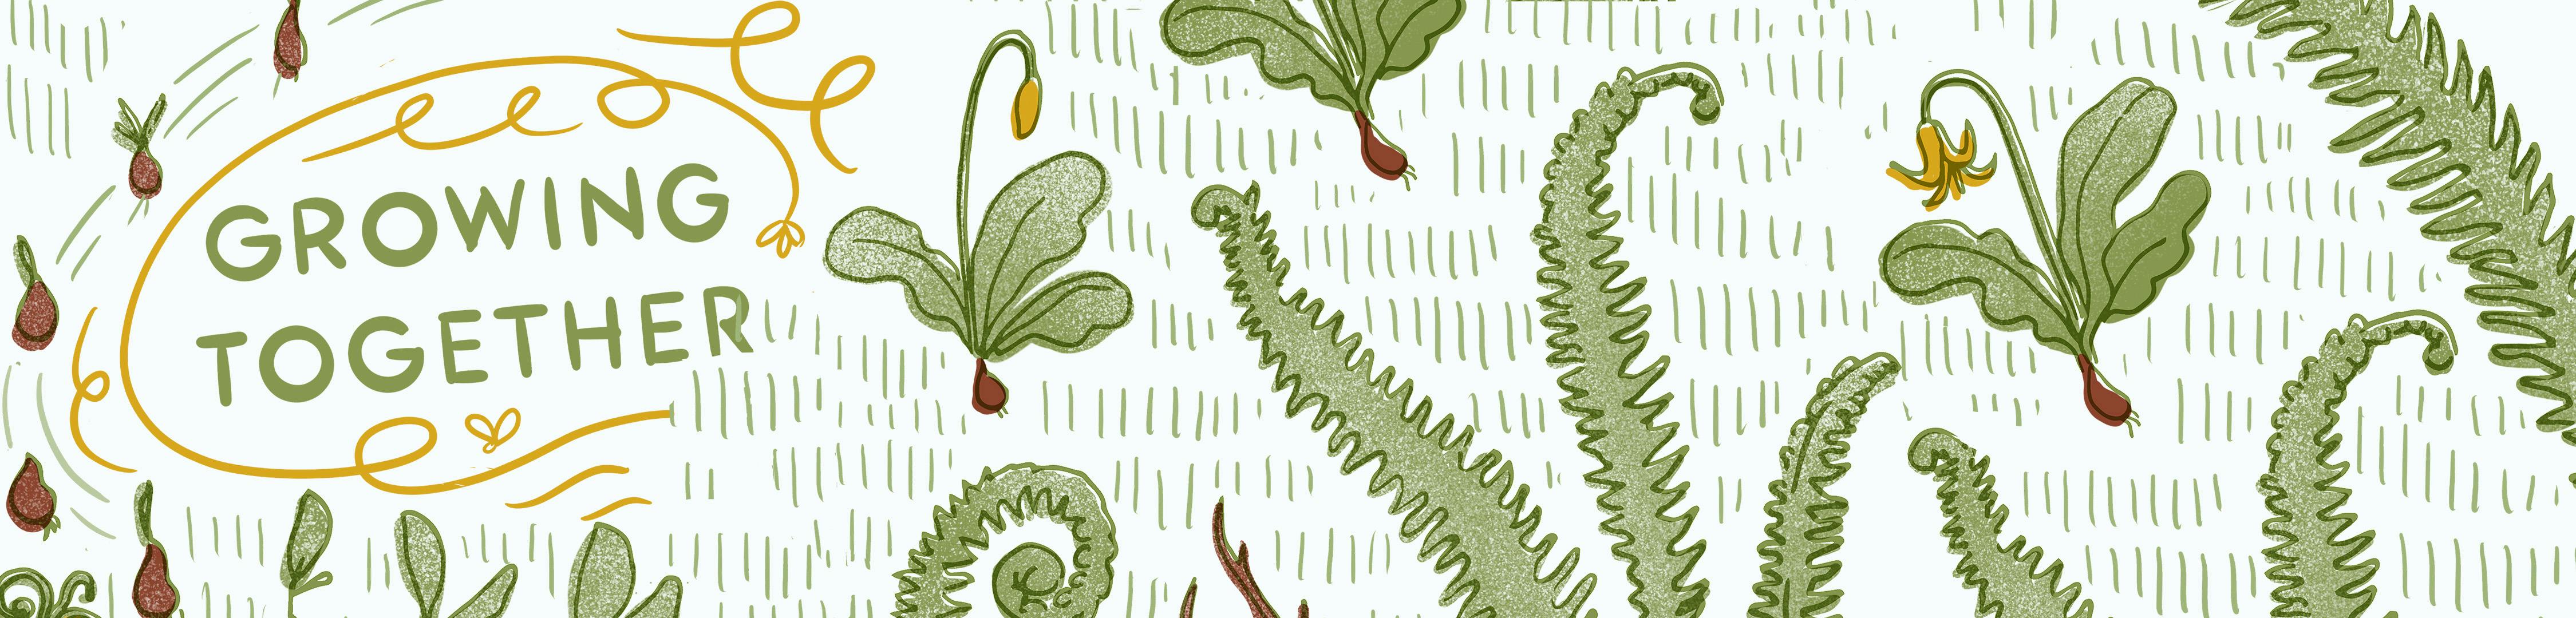 Growing Together illustration of buds, ferns and growing plants